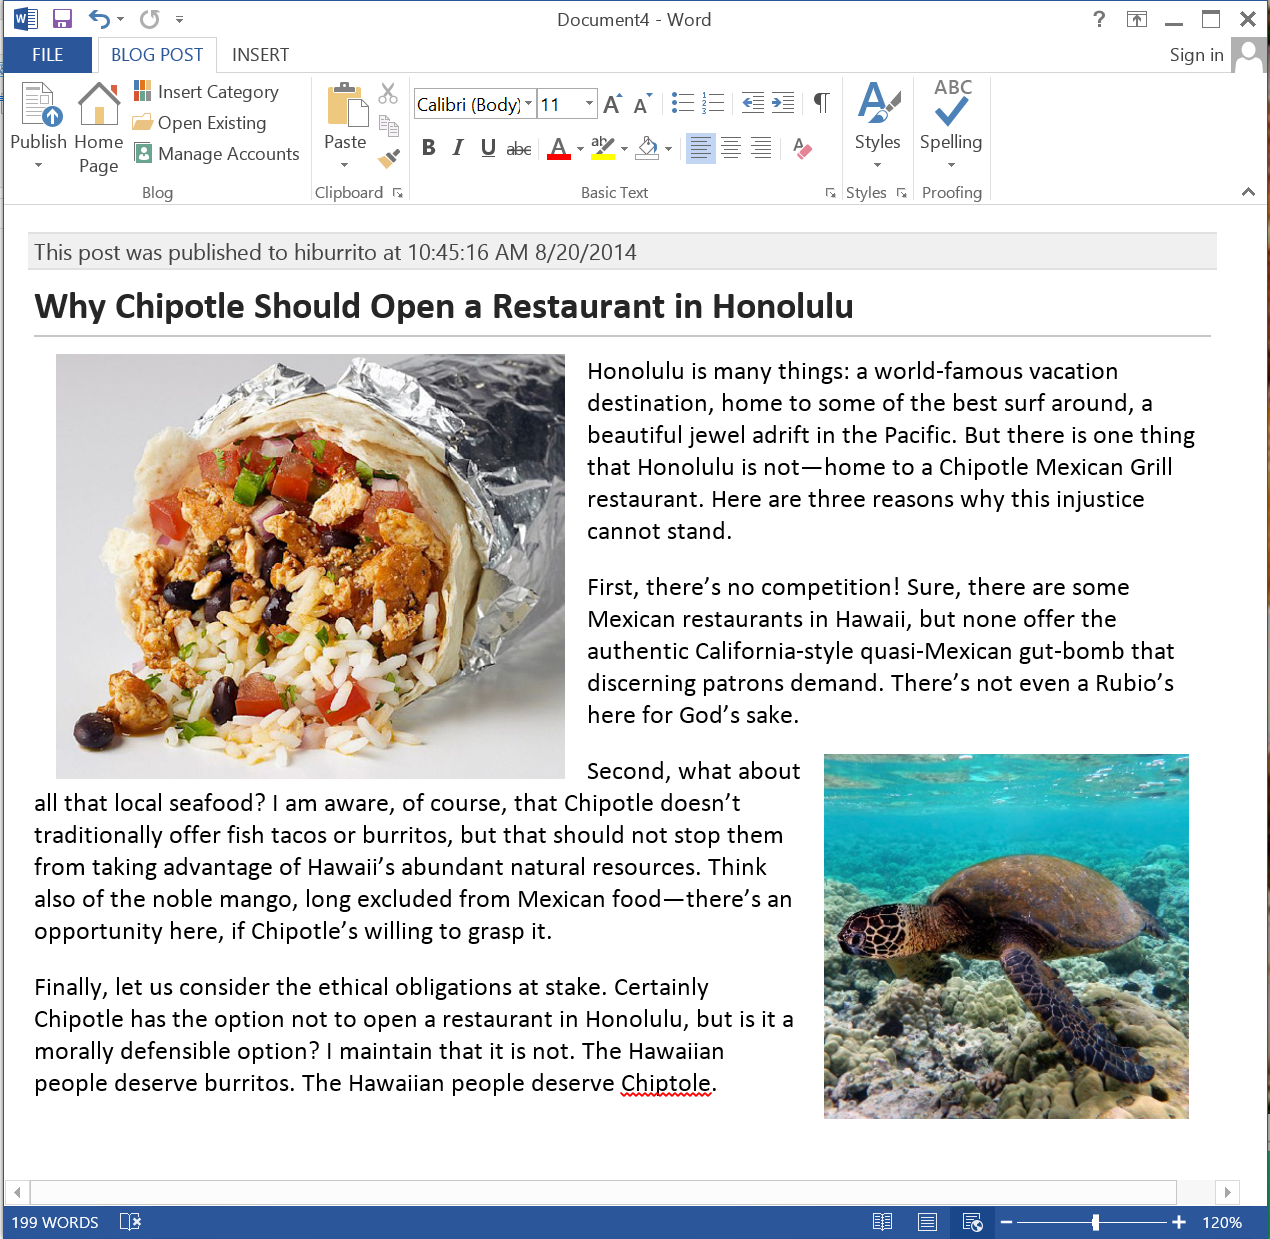 How to start blogging using Microsoft Word with WordPress or Blogger